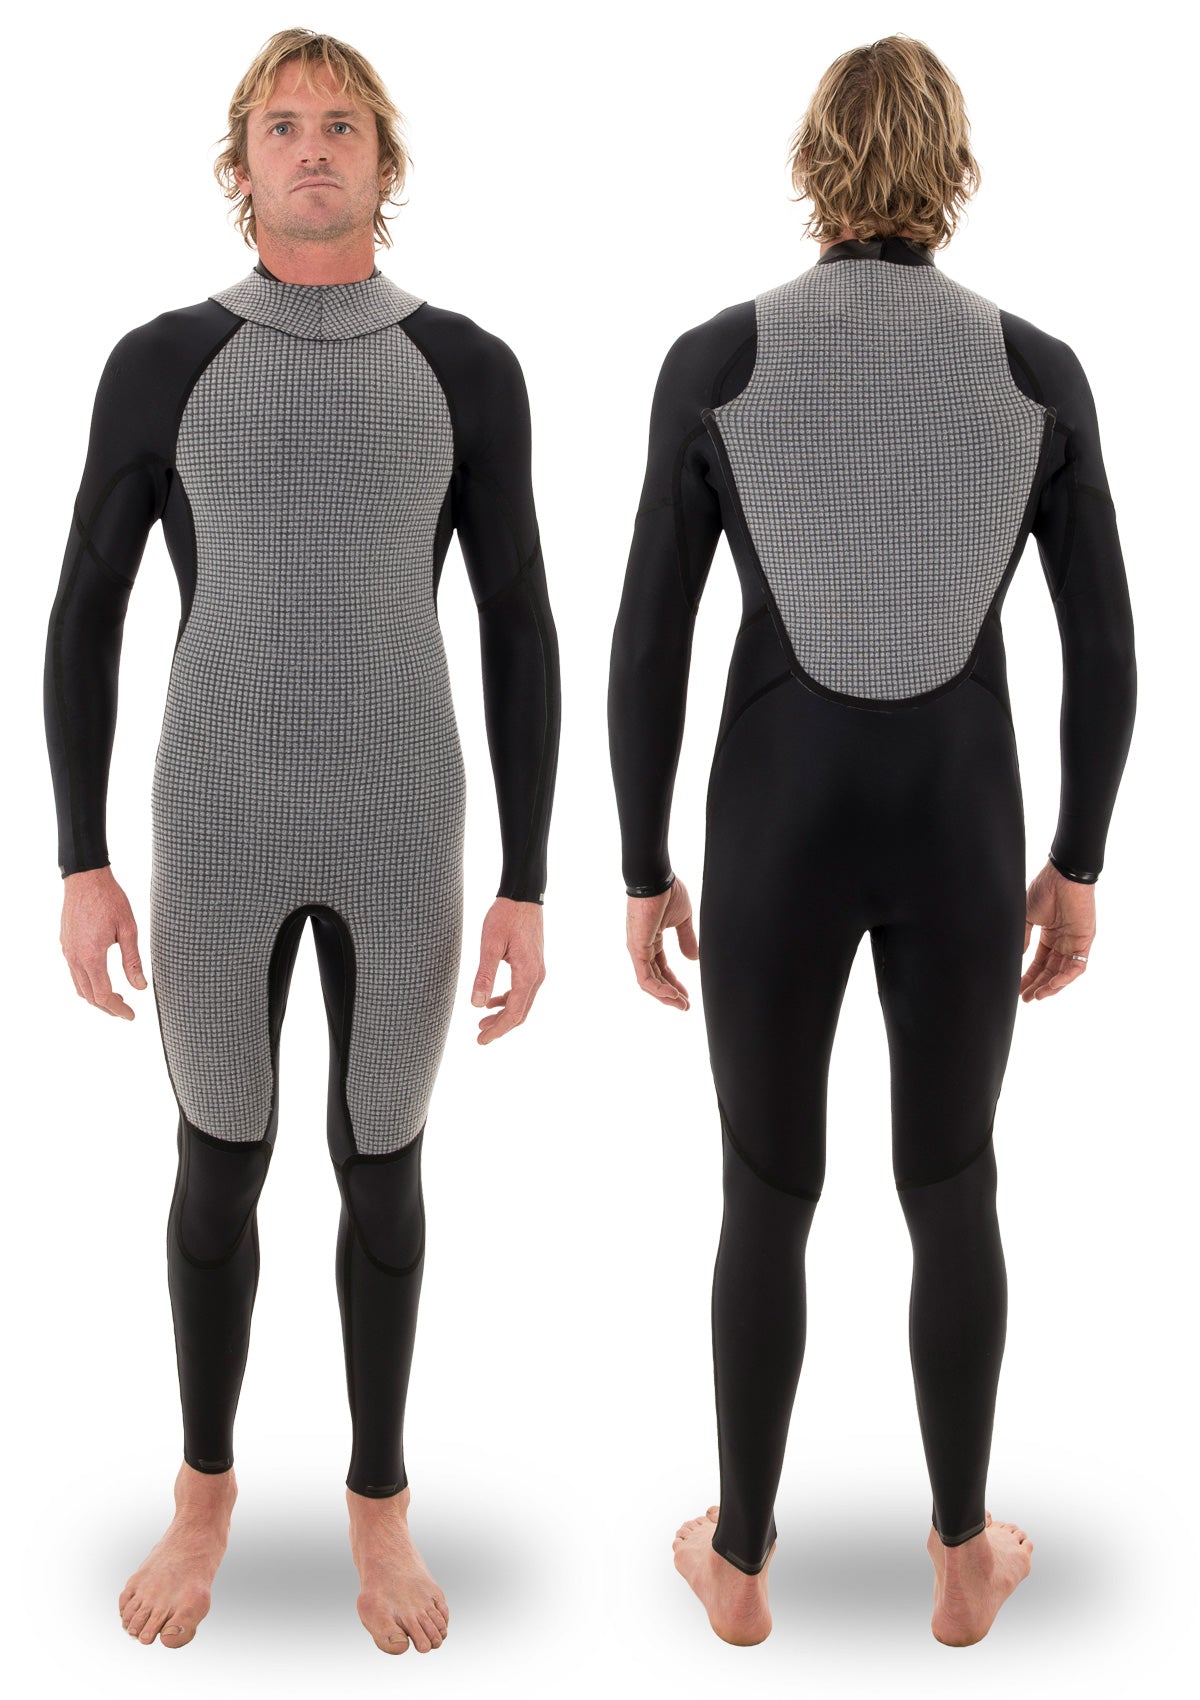 needessentials 4/3 back zip thermal wetsuit laurie towner surfing winter non branded big waves